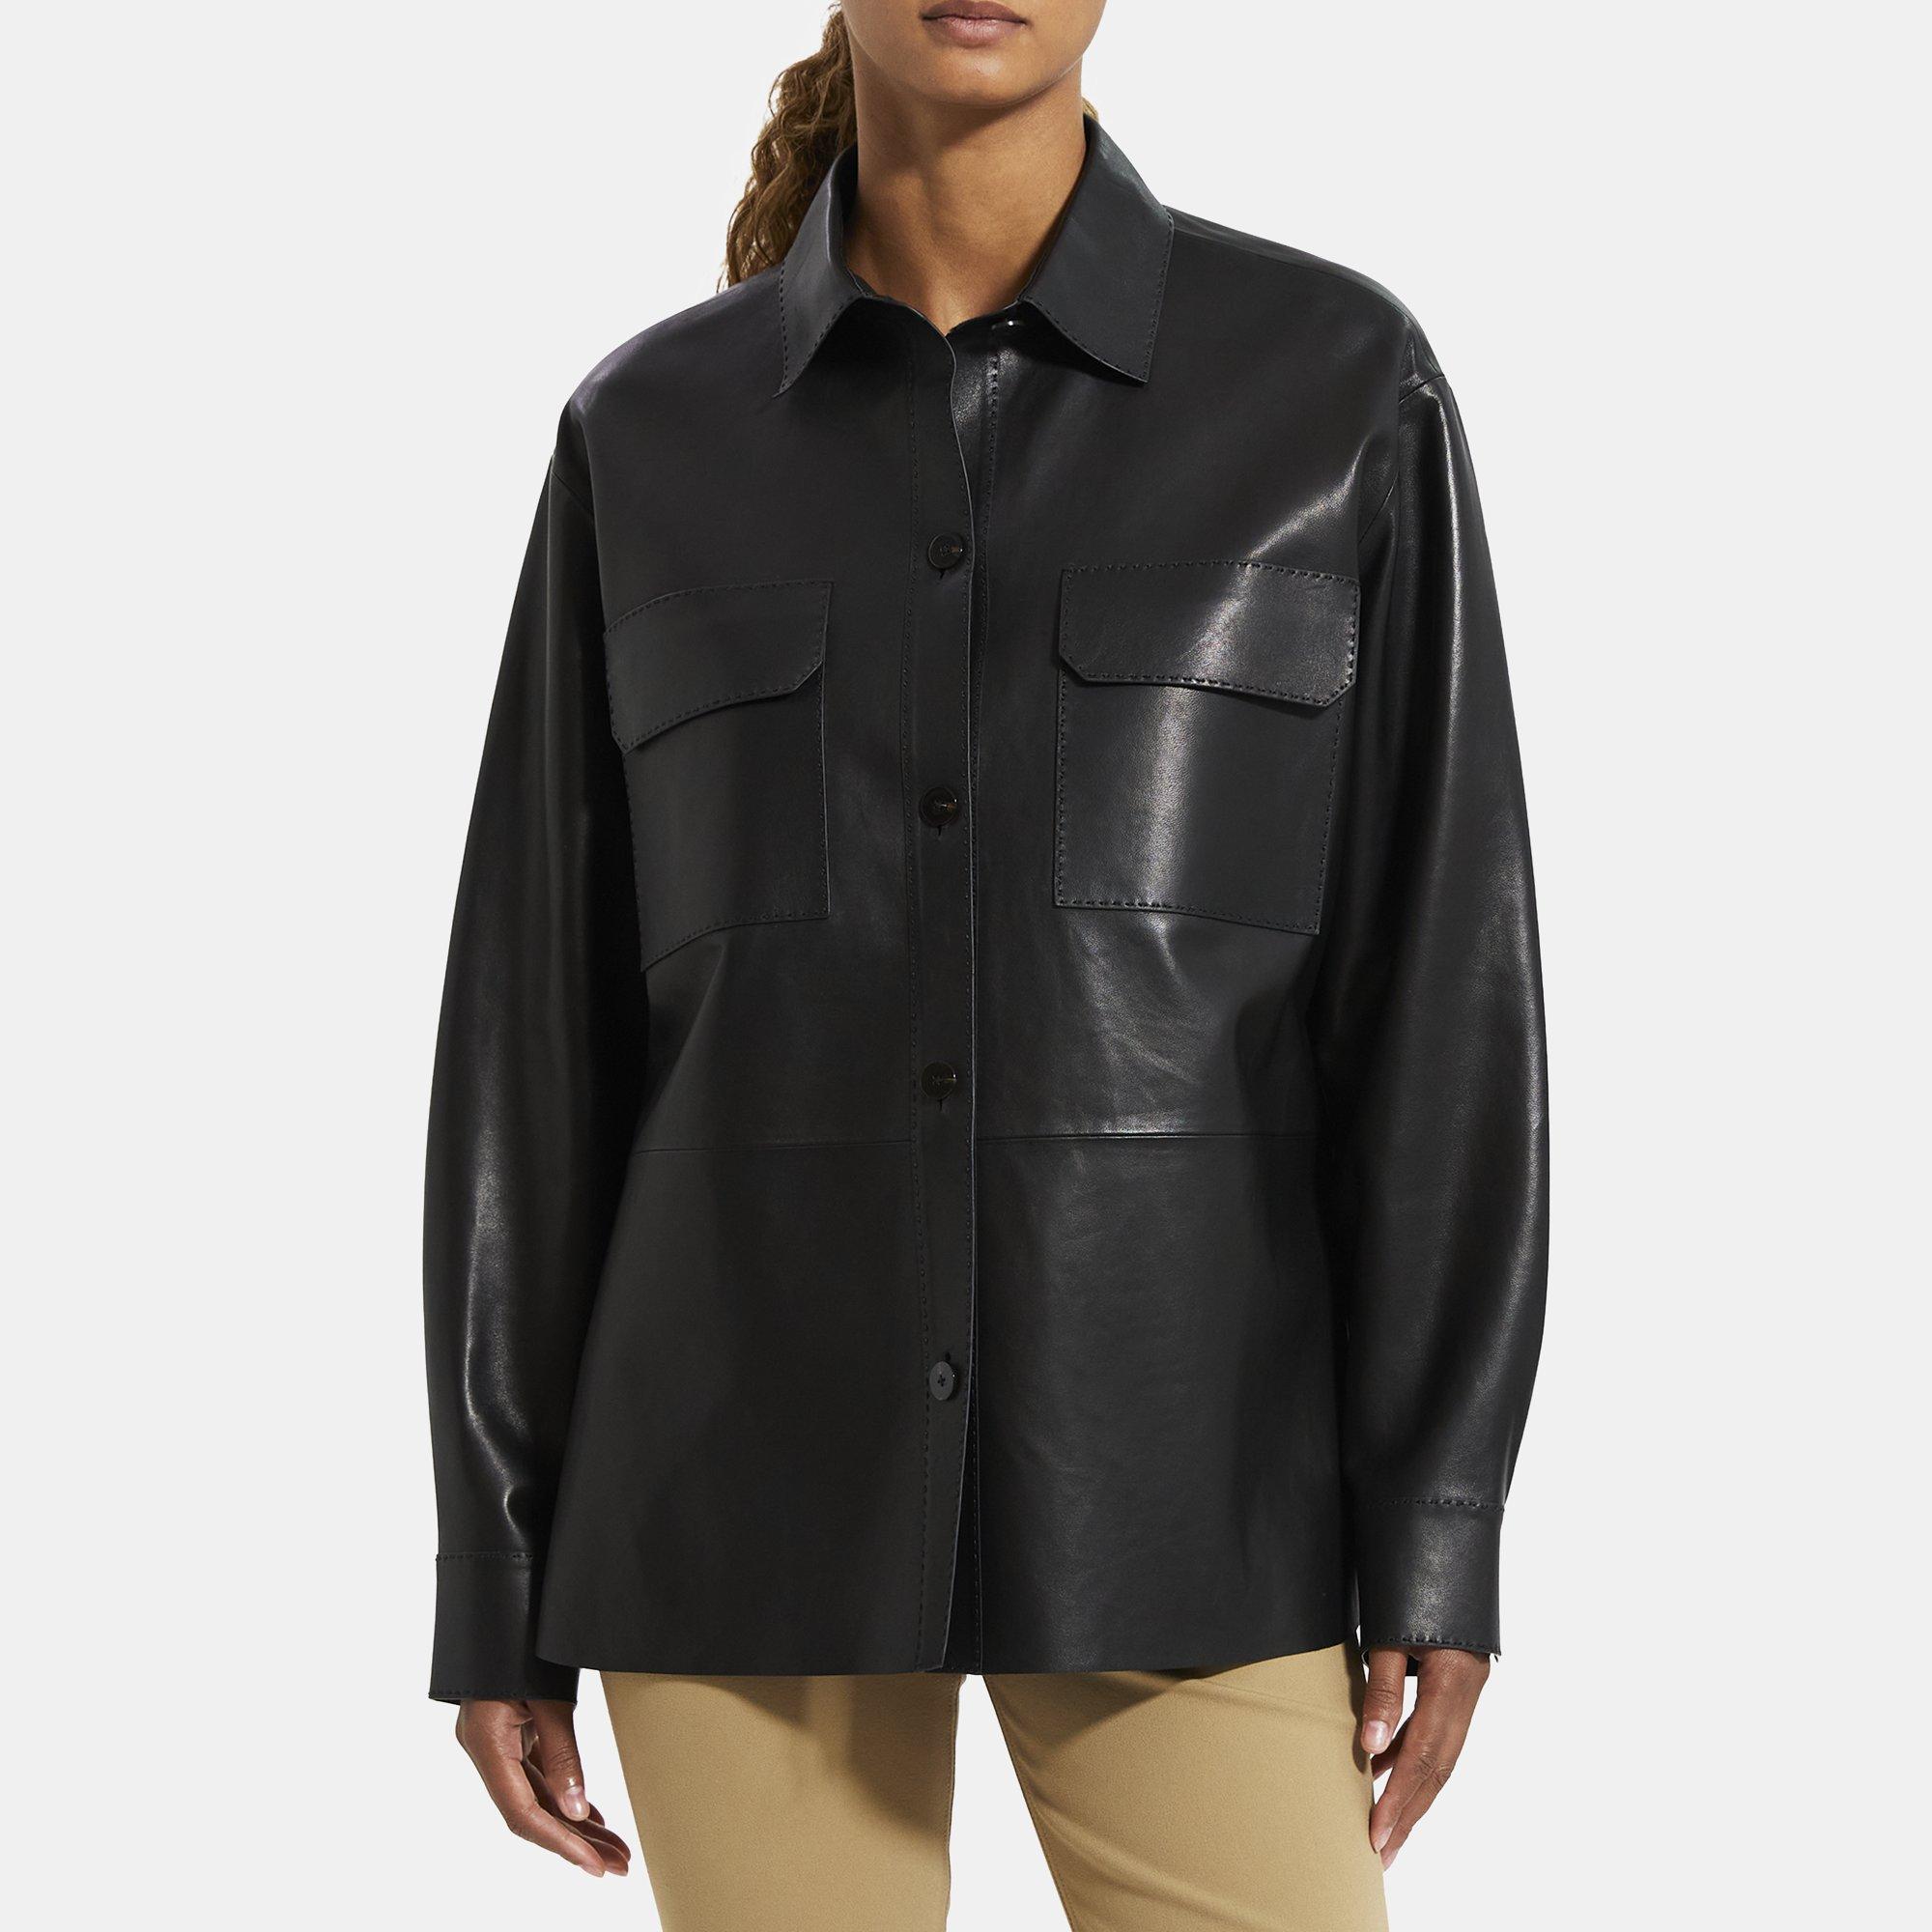 Theory Leather Top | brebdude.com